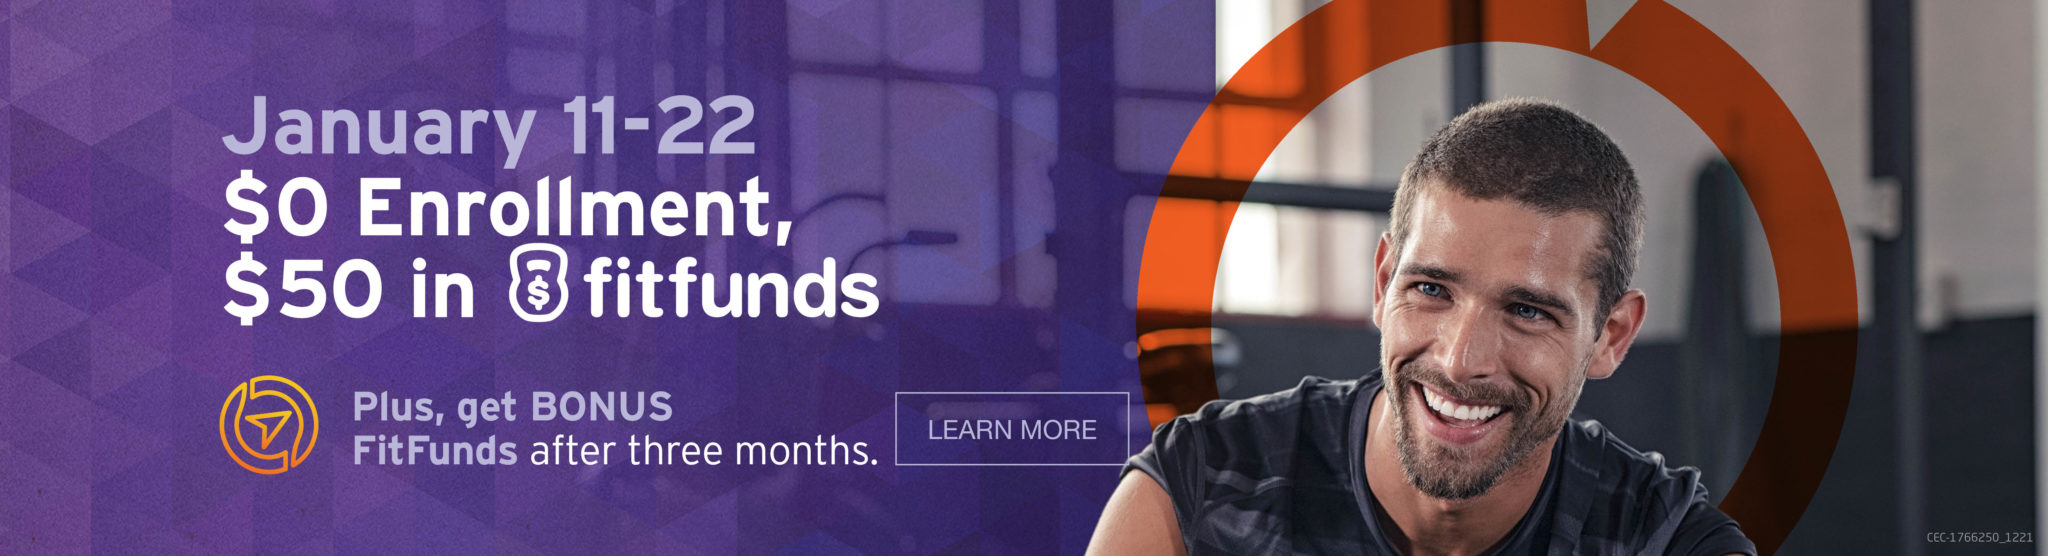 January 11 – 22 $0 Enrollment and $50 in FitFunds